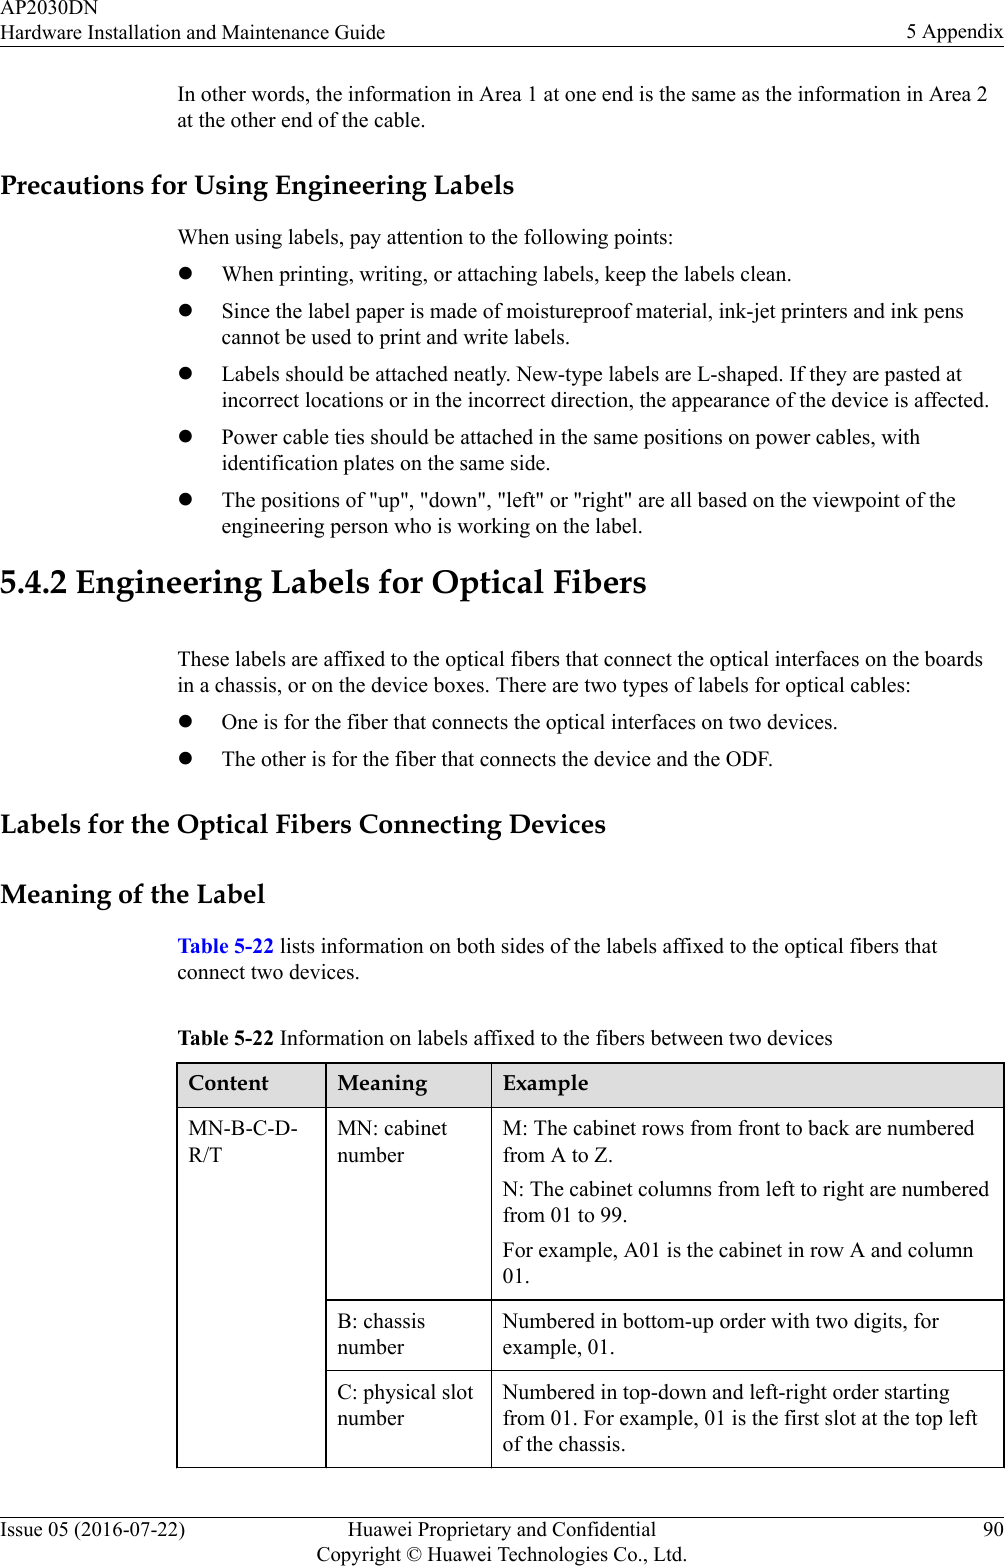 In other words, the information in Area 1 at one end is the same as the information in Area 2at the other end of the cable.Precautions for Using Engineering LabelsWhen using labels, pay attention to the following points:lWhen printing, writing, or attaching labels, keep the labels clean.lSince the label paper is made of moistureproof material, ink-jet printers and ink penscannot be used to print and write labels.lLabels should be attached neatly. New-type labels are L-shaped. If they are pasted atincorrect locations or in the incorrect direction, the appearance of the device is affected.lPower cable ties should be attached in the same positions on power cables, withidentification plates on the same side.lThe positions of &quot;up&quot;, &quot;down&quot;, &quot;left&quot; or &quot;right&quot; are all based on the viewpoint of theengineering person who is working on the label.5.4.2 Engineering Labels for Optical FibersThese labels are affixed to the optical fibers that connect the optical interfaces on the boardsin a chassis, or on the device boxes. There are two types of labels for optical cables:lOne is for the fiber that connects the optical interfaces on two devices.lThe other is for the fiber that connects the device and the ODF.Labels for the Optical Fibers Connecting DevicesMeaning of the LabelTable 5-22 lists information on both sides of the labels affixed to the optical fibers thatconnect two devices.Table 5-22 Information on labels affixed to the fibers between two devicesContent Meaning ExampleMN-B-C-D-R/TMN: cabinetnumberM: The cabinet rows from front to back are numberedfrom A to Z.N: The cabinet columns from left to right are numberedfrom 01 to 99.For example, A01 is the cabinet in row A and column01.B: chassisnumberNumbered in bottom-up order with two digits, forexample, 01.C: physical slotnumberNumbered in top-down and left-right order startingfrom 01. For example, 01 is the first slot at the top leftof the chassis.AP2030DNHardware Installation and Maintenance Guide 5 AppendixIssue 05 (2016-07-22) Huawei Proprietary and ConfidentialCopyright © Huawei Technologies Co., Ltd.90